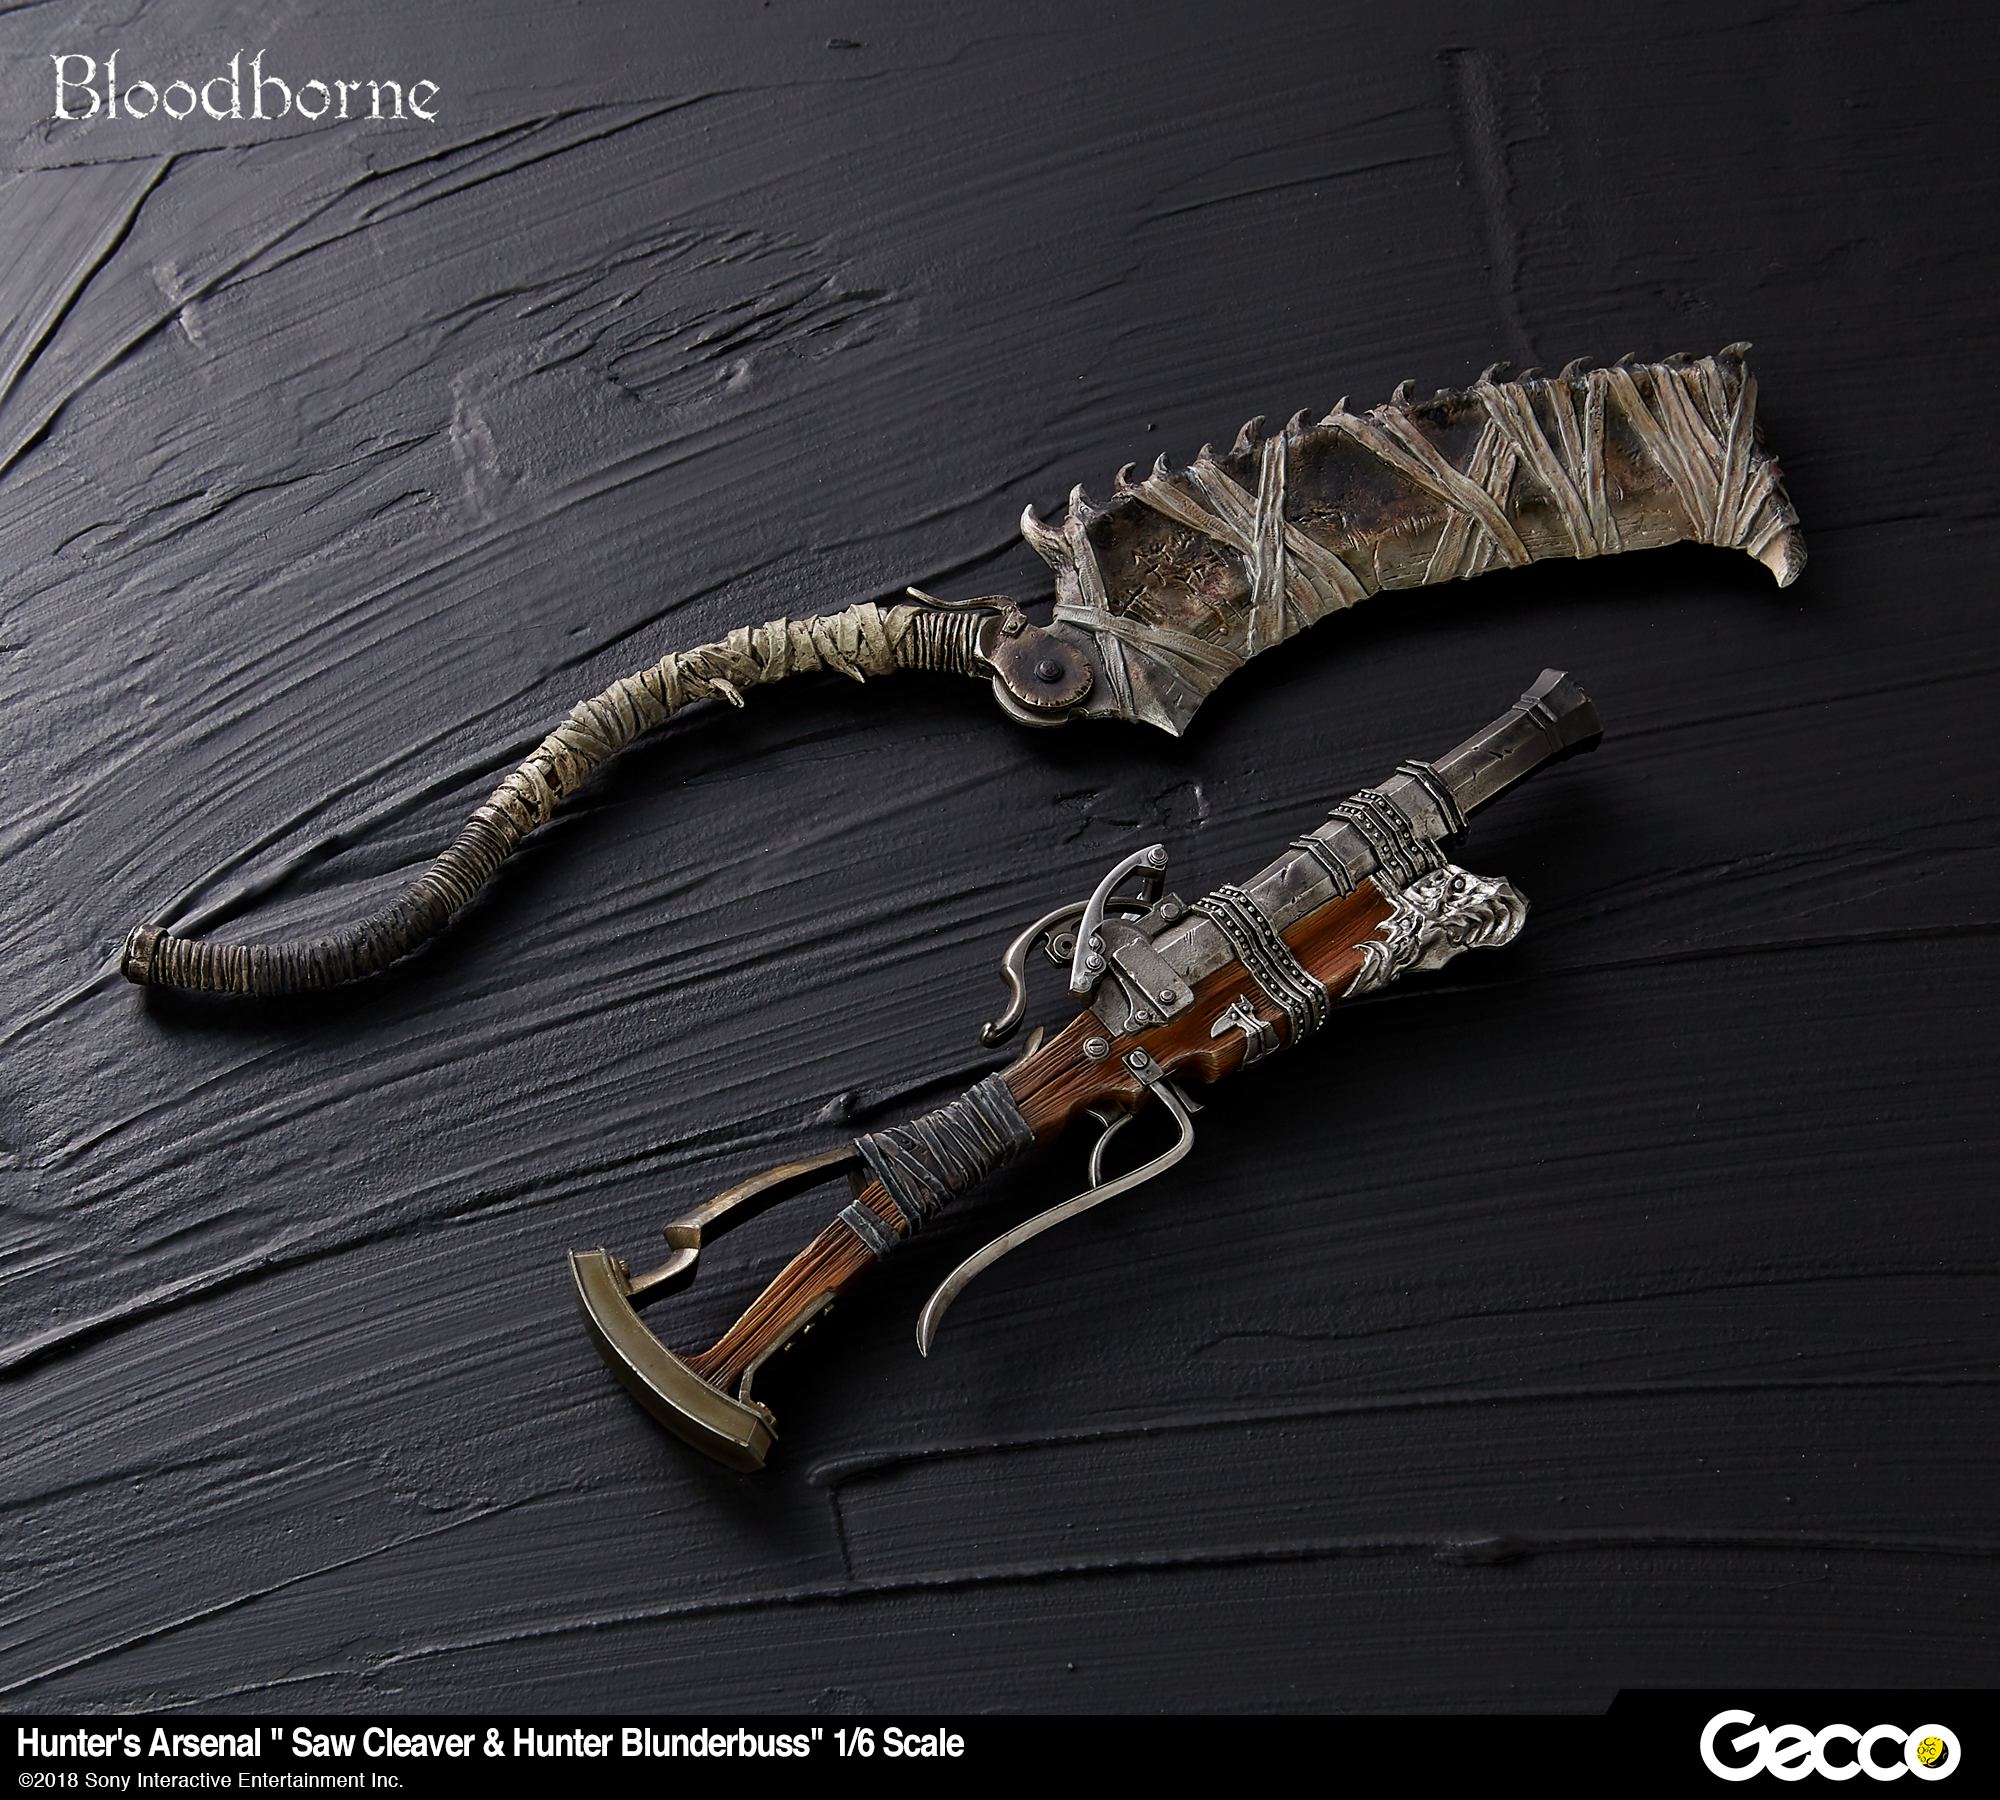 BLOODBORNE 1/6 SCALE WEAPON: HUNTER'S ARSENAL SAW CLEAVER & HUNTER BLUNDERBUSS Gecco